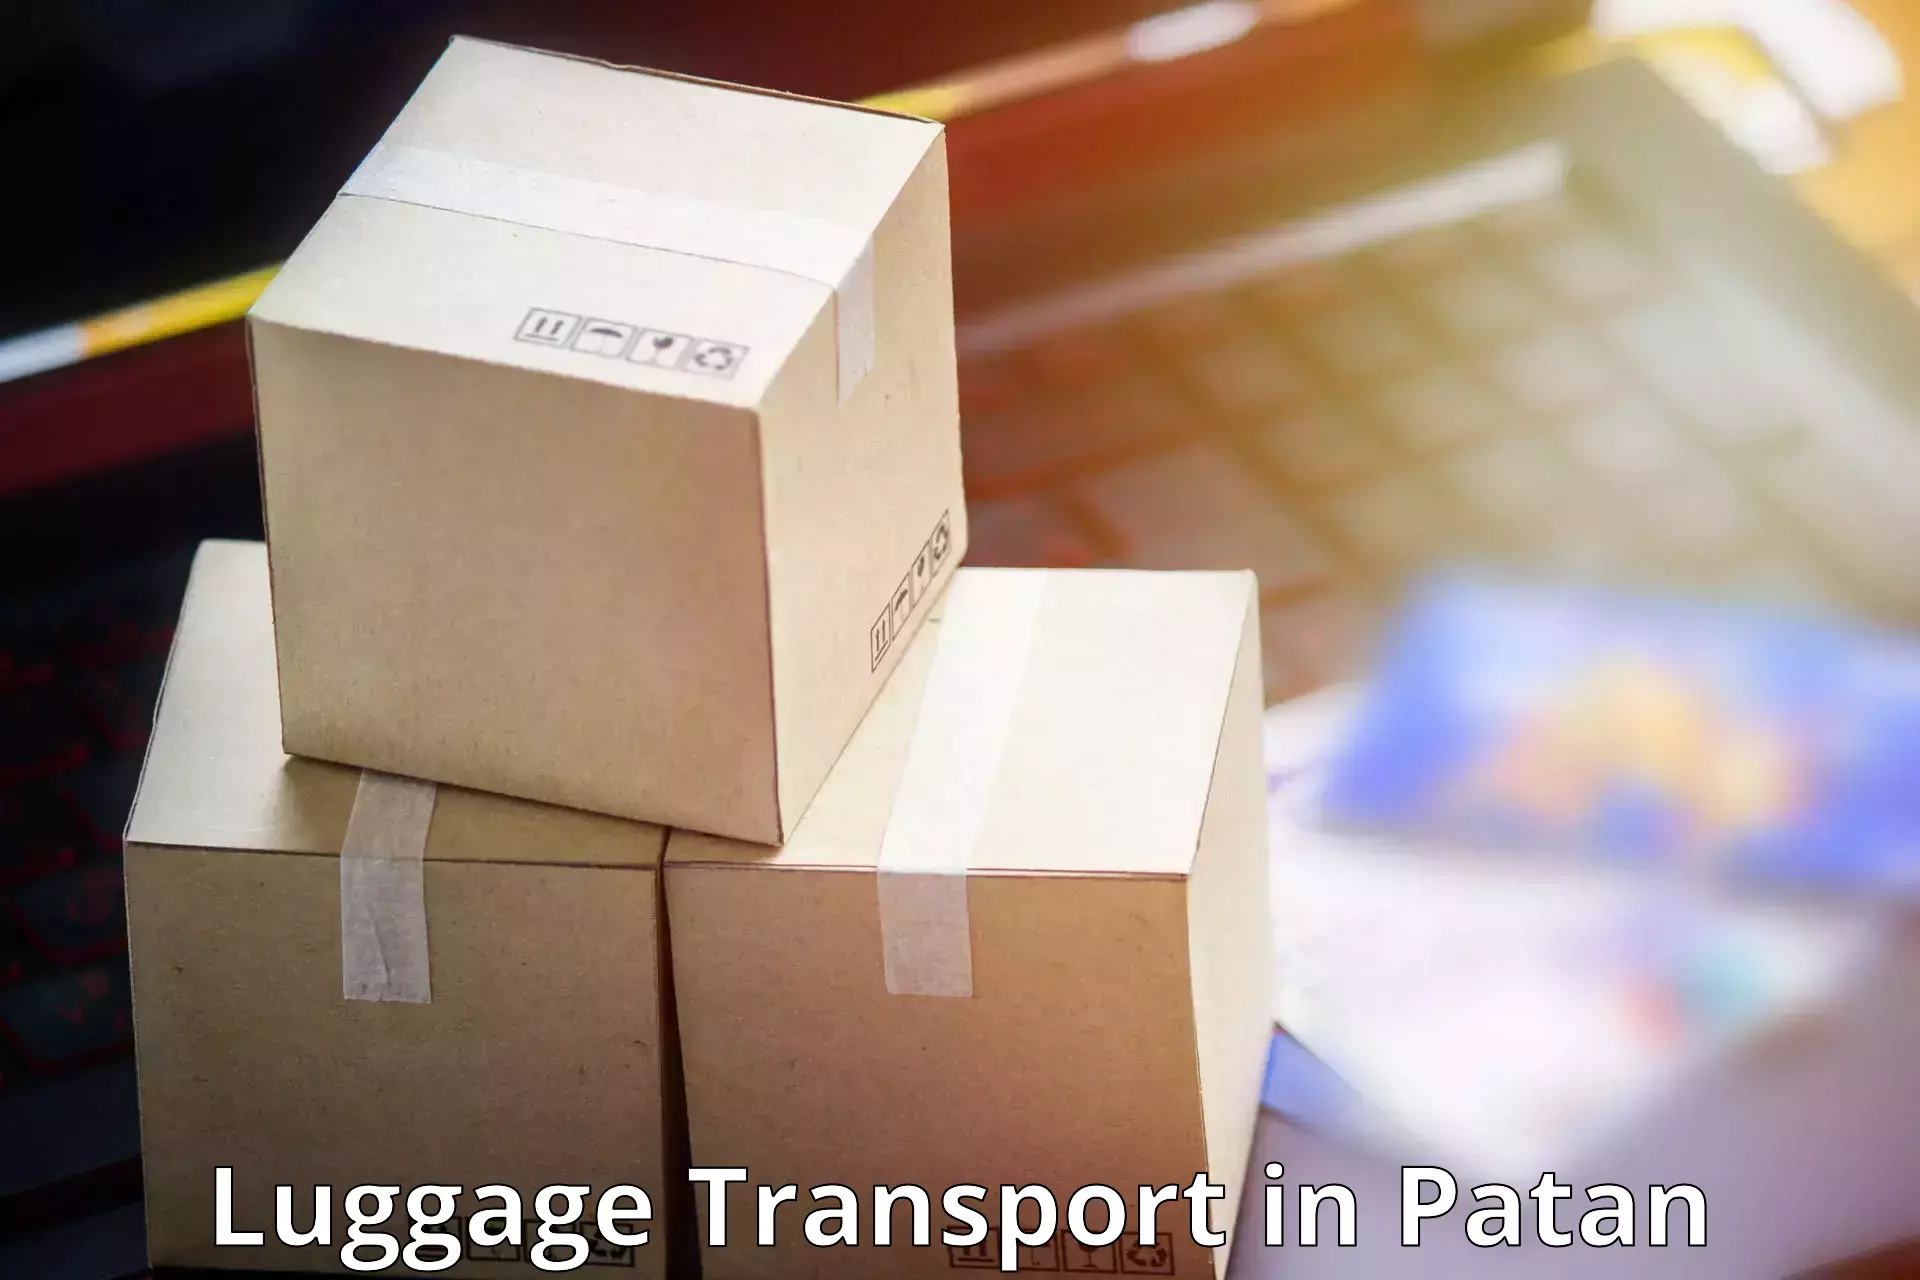 Luggage transport service in Patan